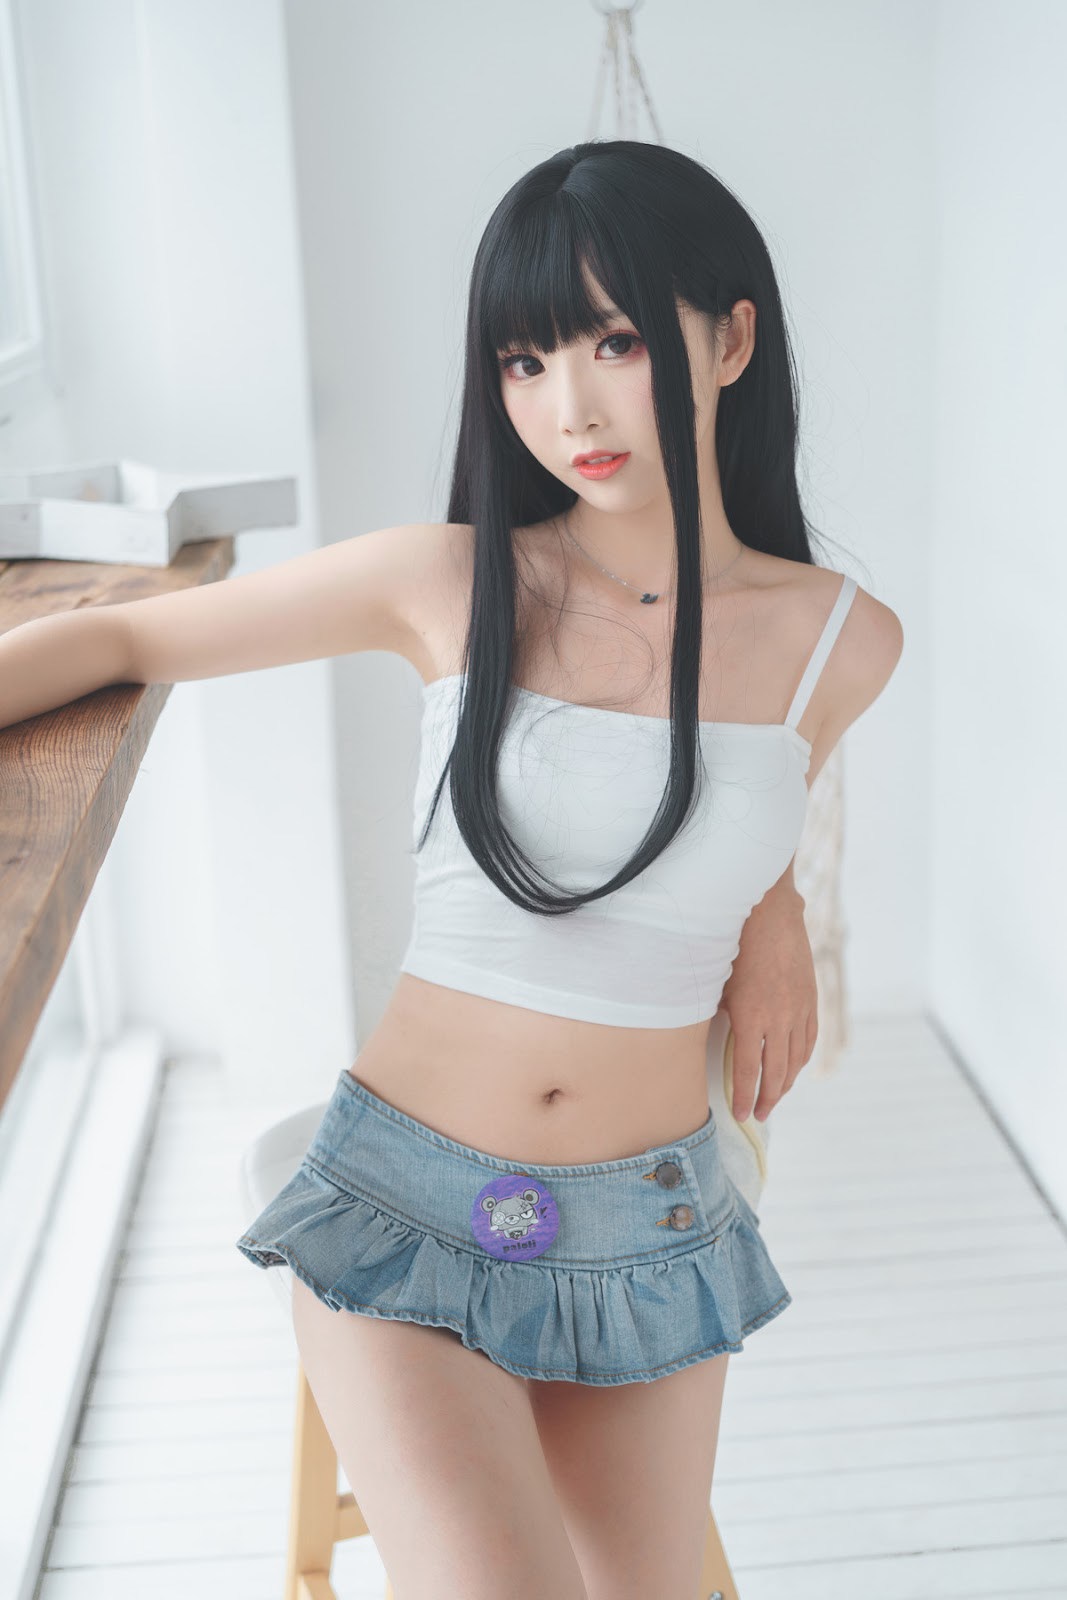 Cosplay 面饼仙儿 可爱女友(5)